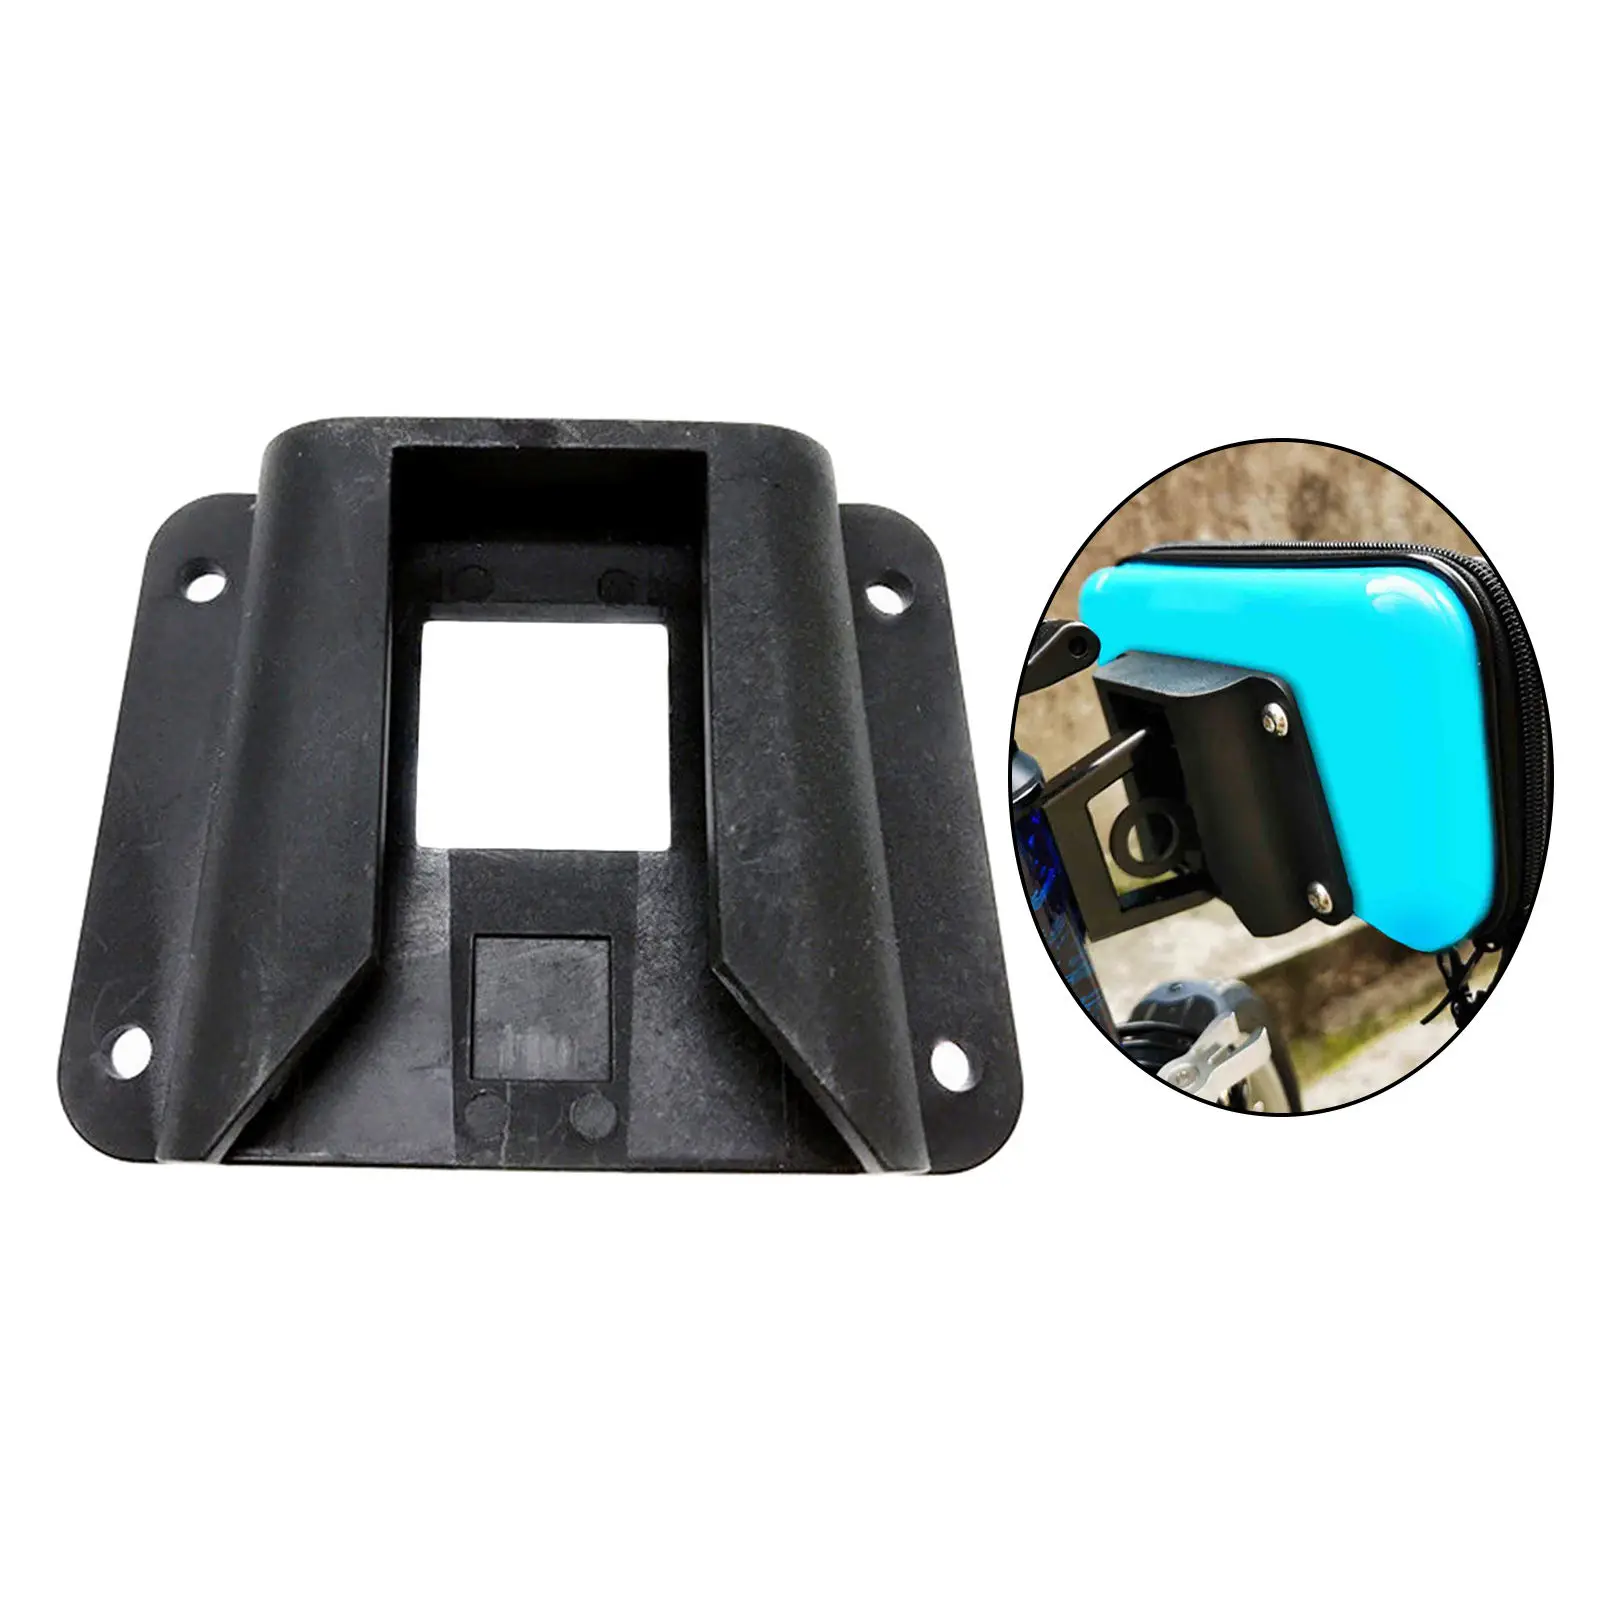 Carrier Block Adapter For Brompton Folding Bike Bicycle Bag Cargo Rack Front Carrier Block Bike Part Accessory